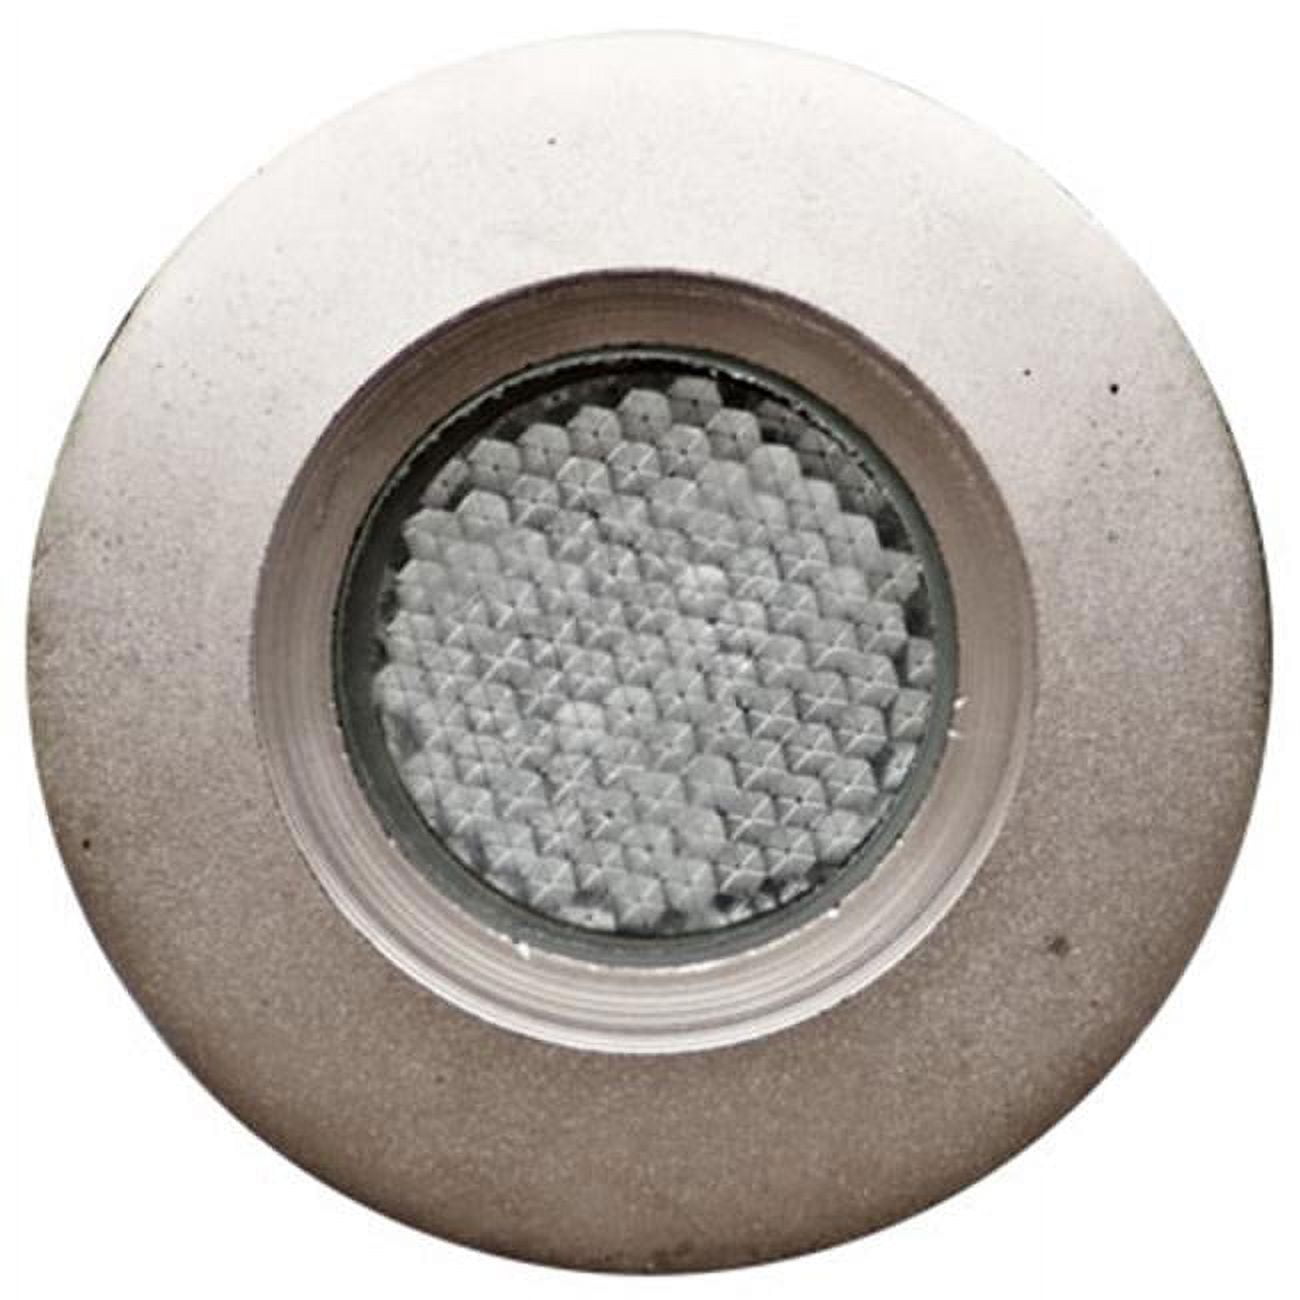 Picture of Dabmar Lighting LV309-G LED In-Ground Green Well Light, Zinc Alloy - 2.95 x 3.43 x 3.43 in.